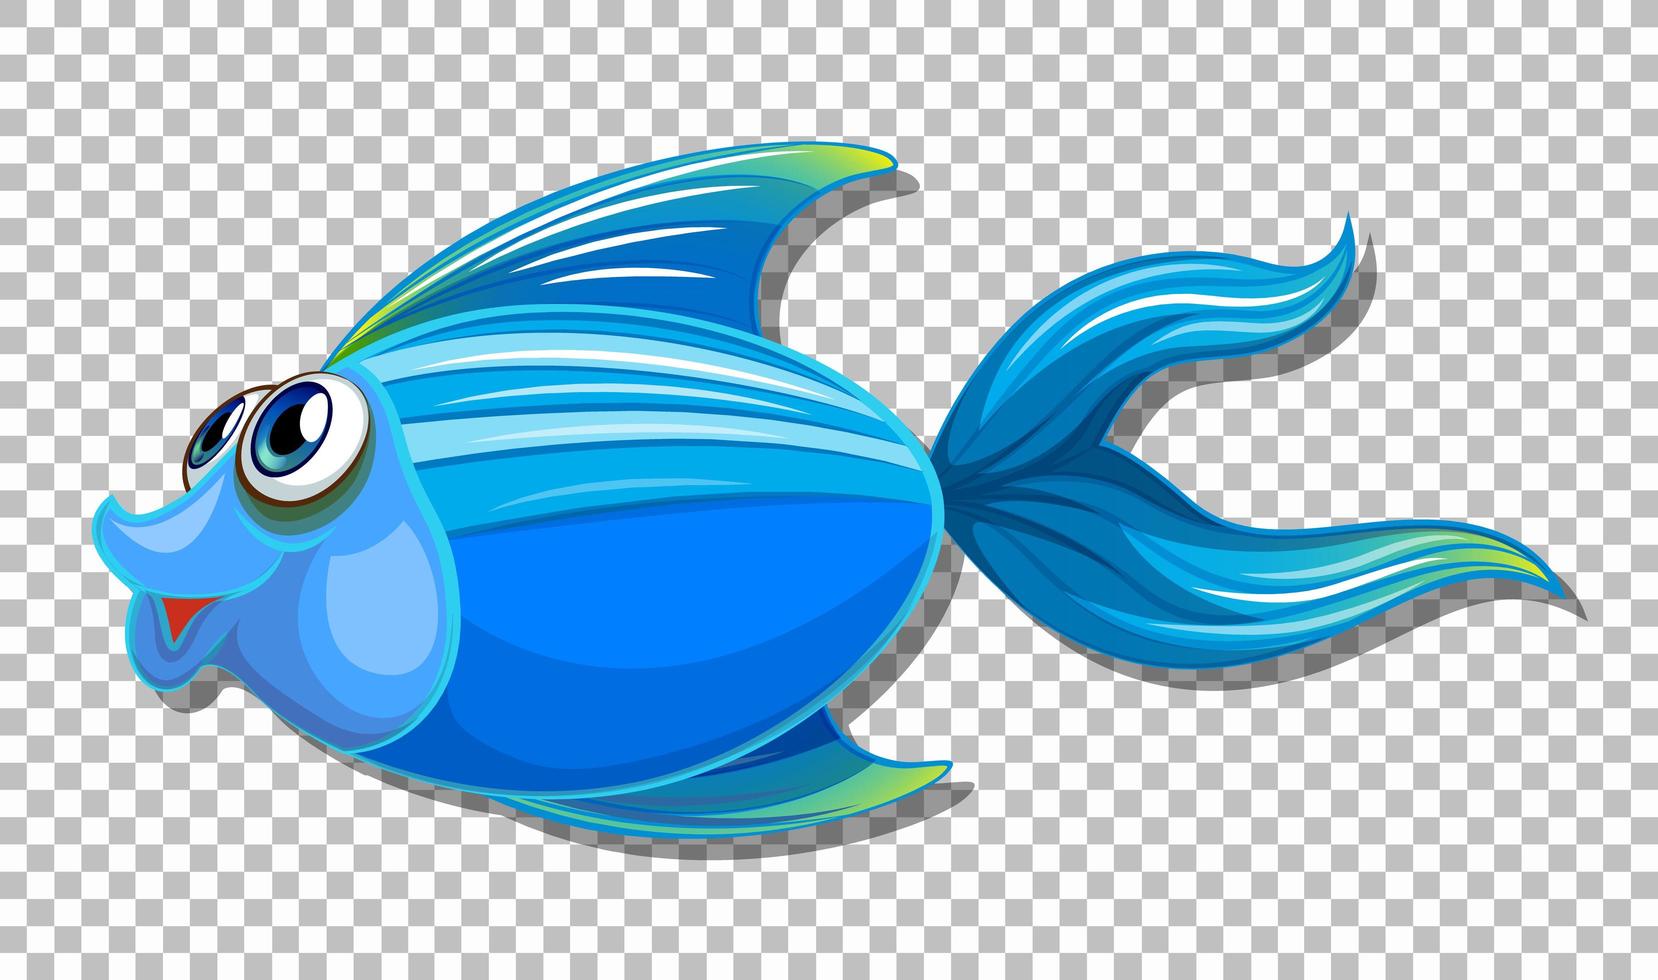 Cute fish with big eyes cartoon character on transparent background vector